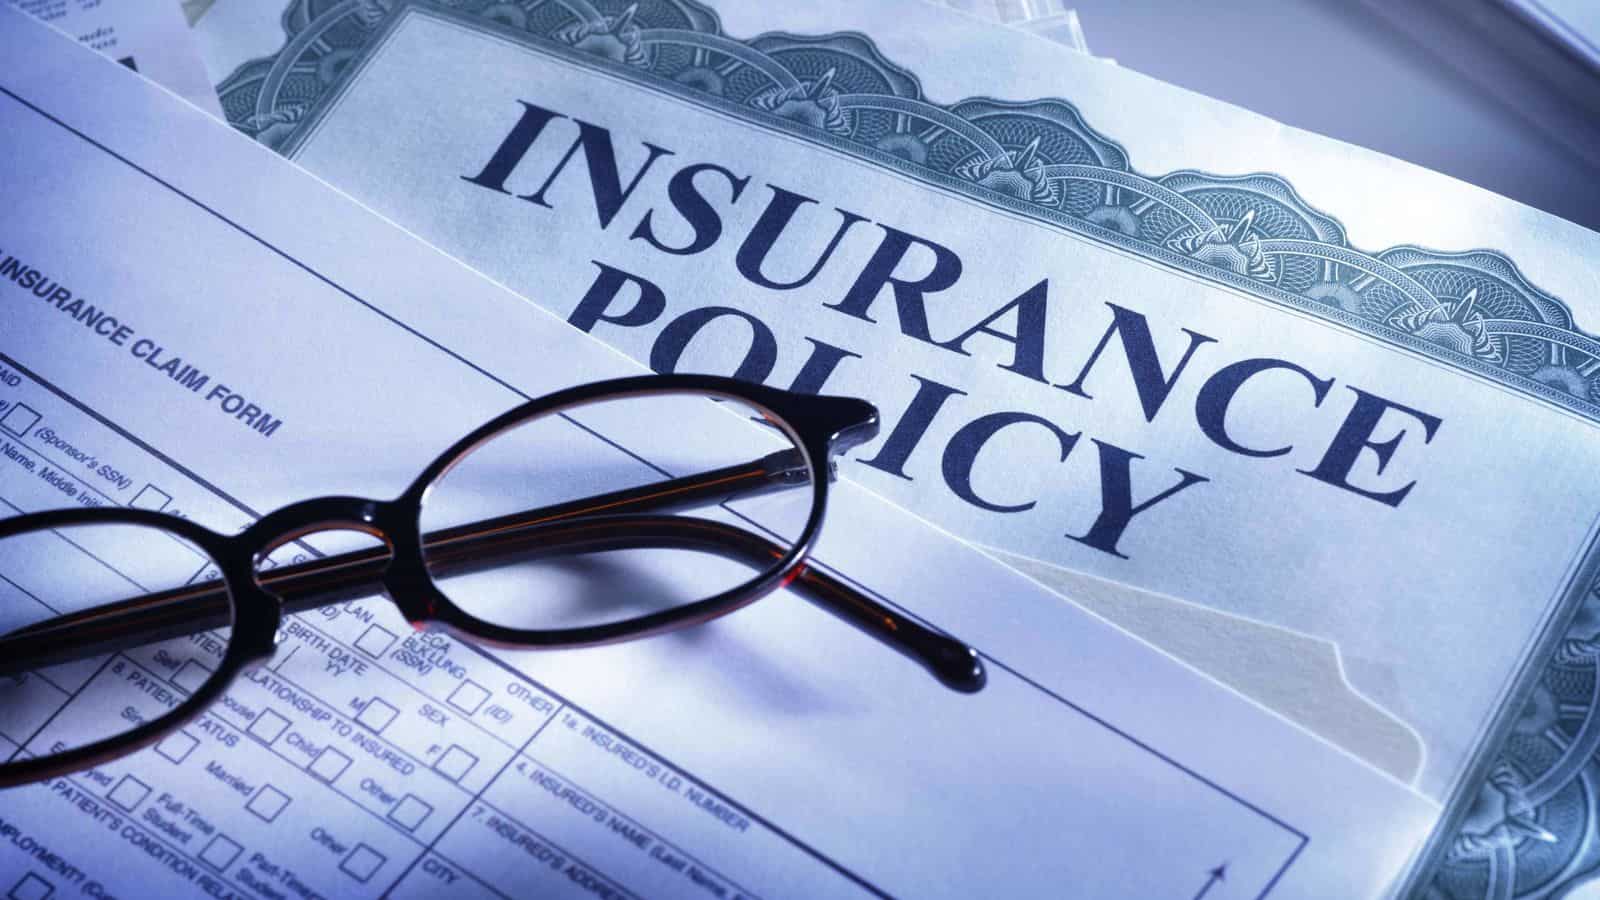 Policyholders Withdraw Over Rs. 1.51 billion Against Policy Surrender